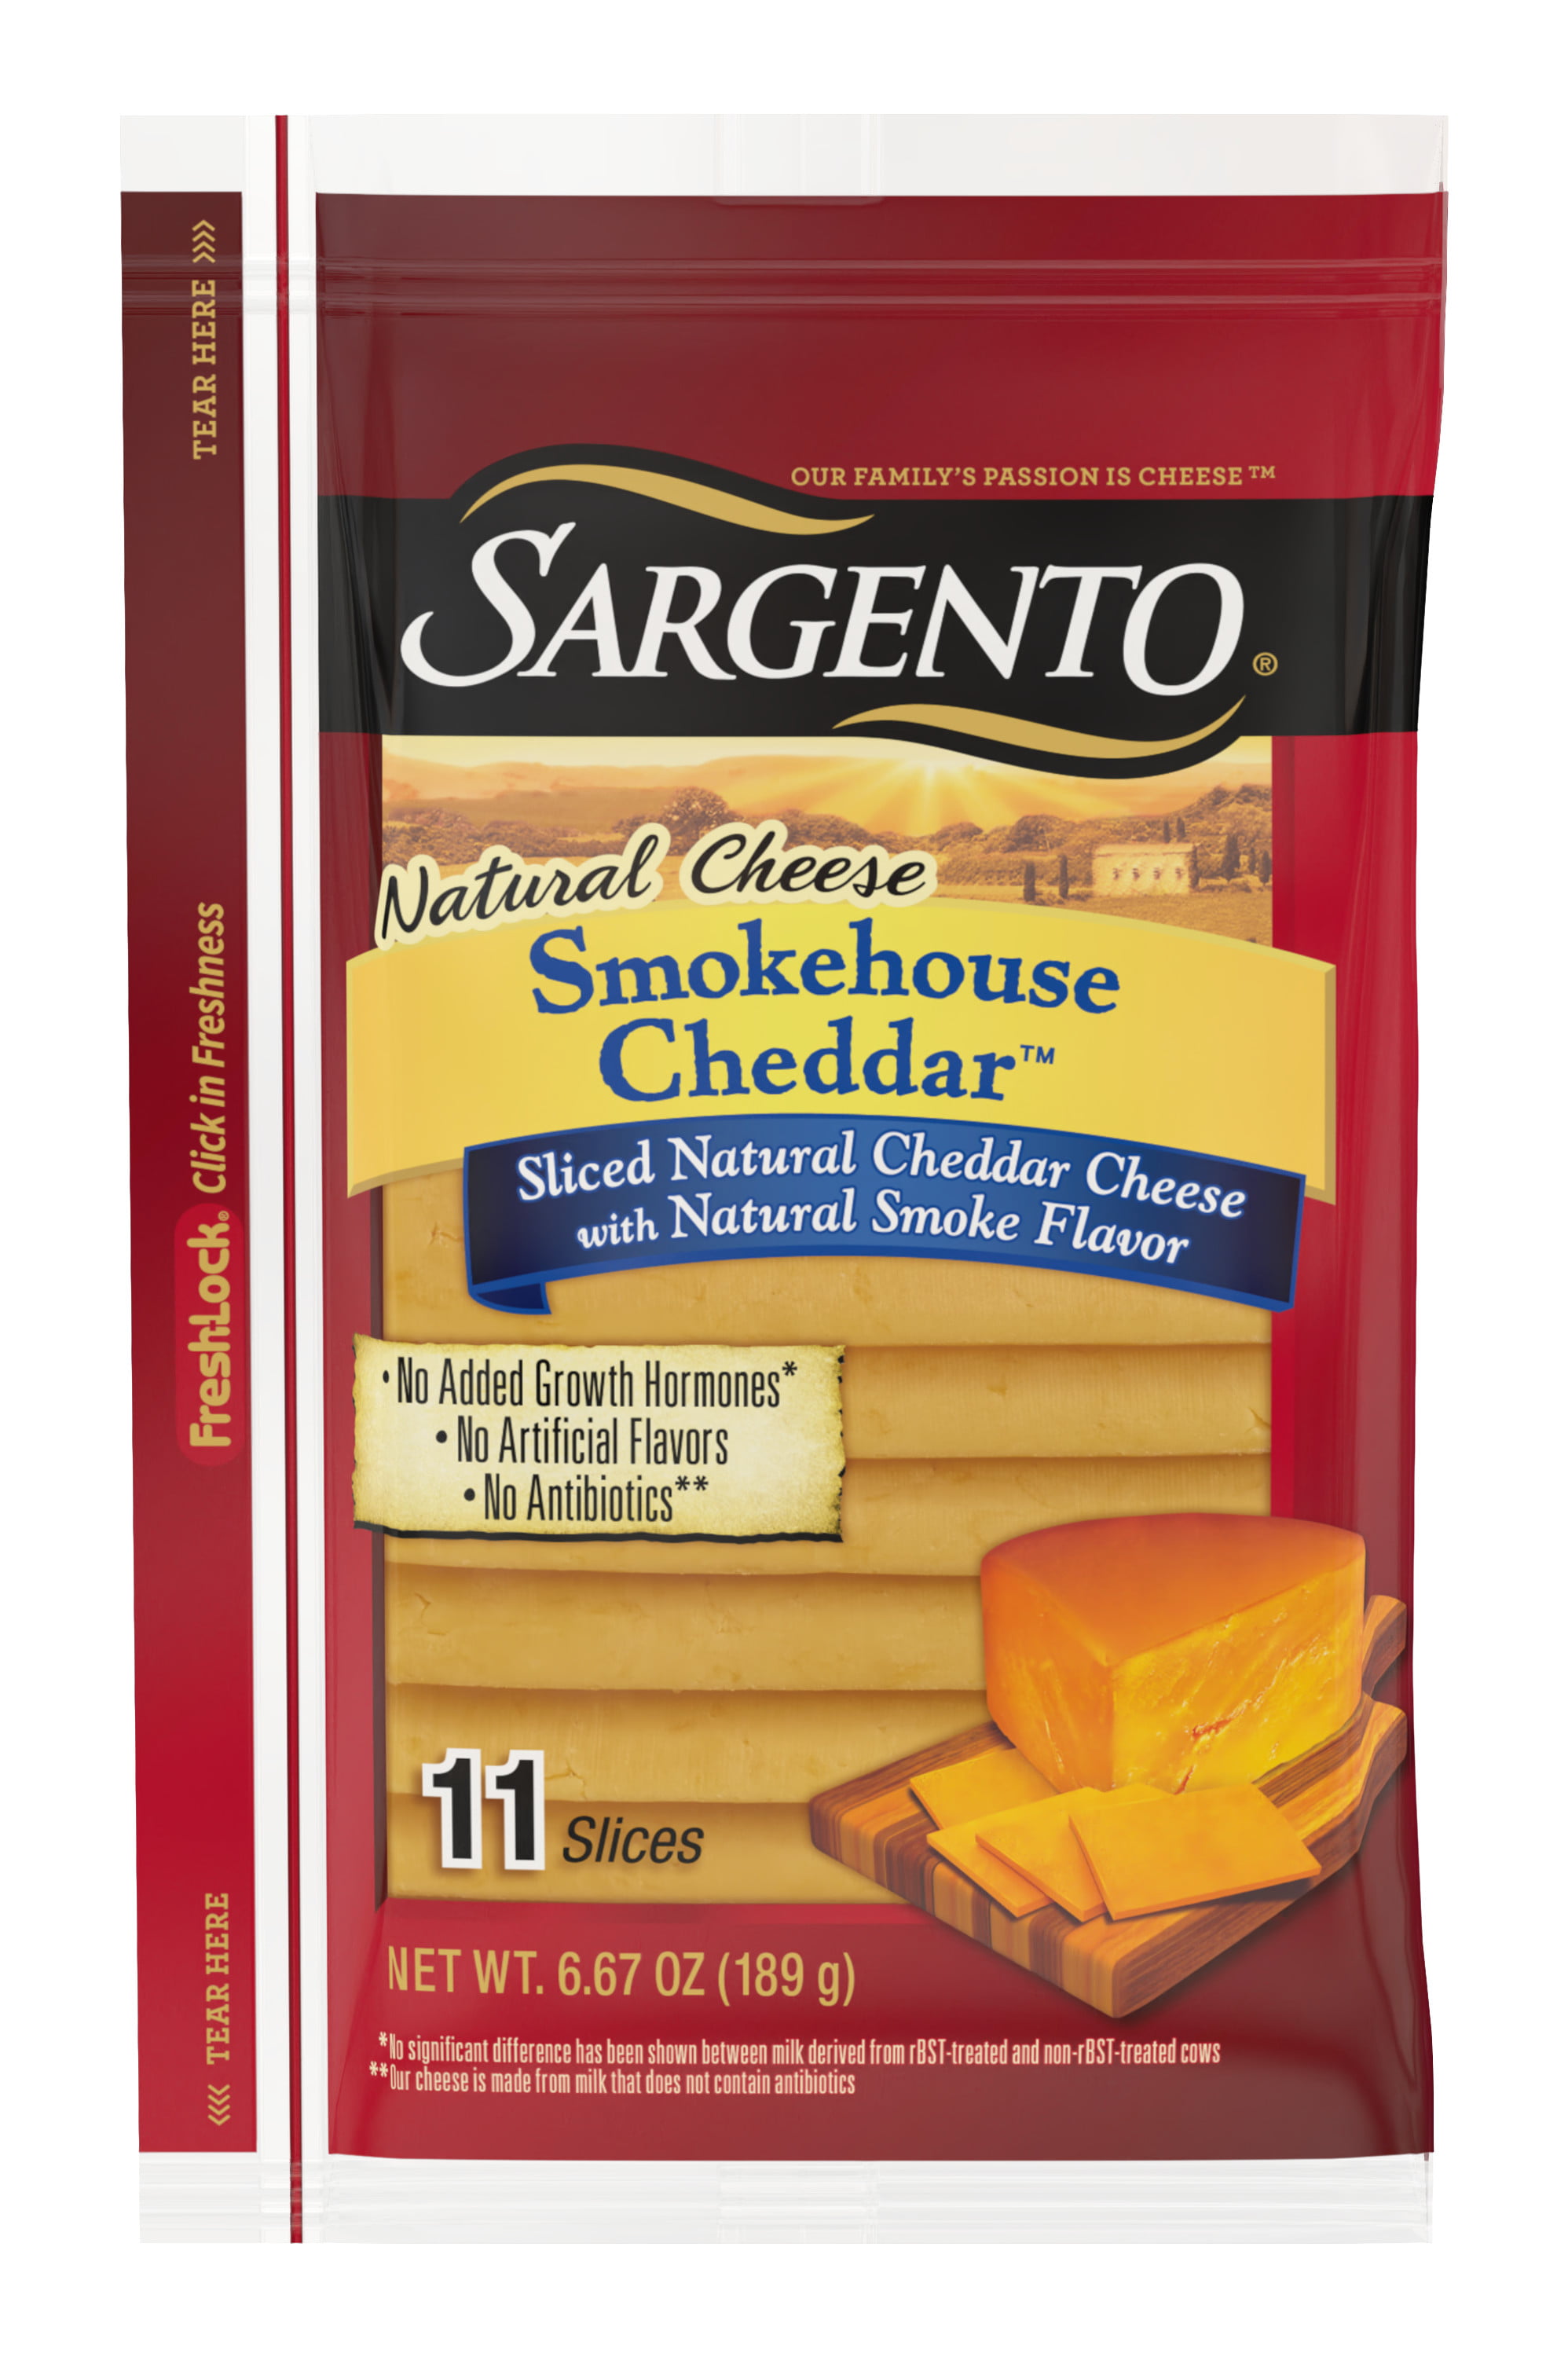 Sargento Sliced Smokehouse Cheddar Natural Cheese 11 Slices